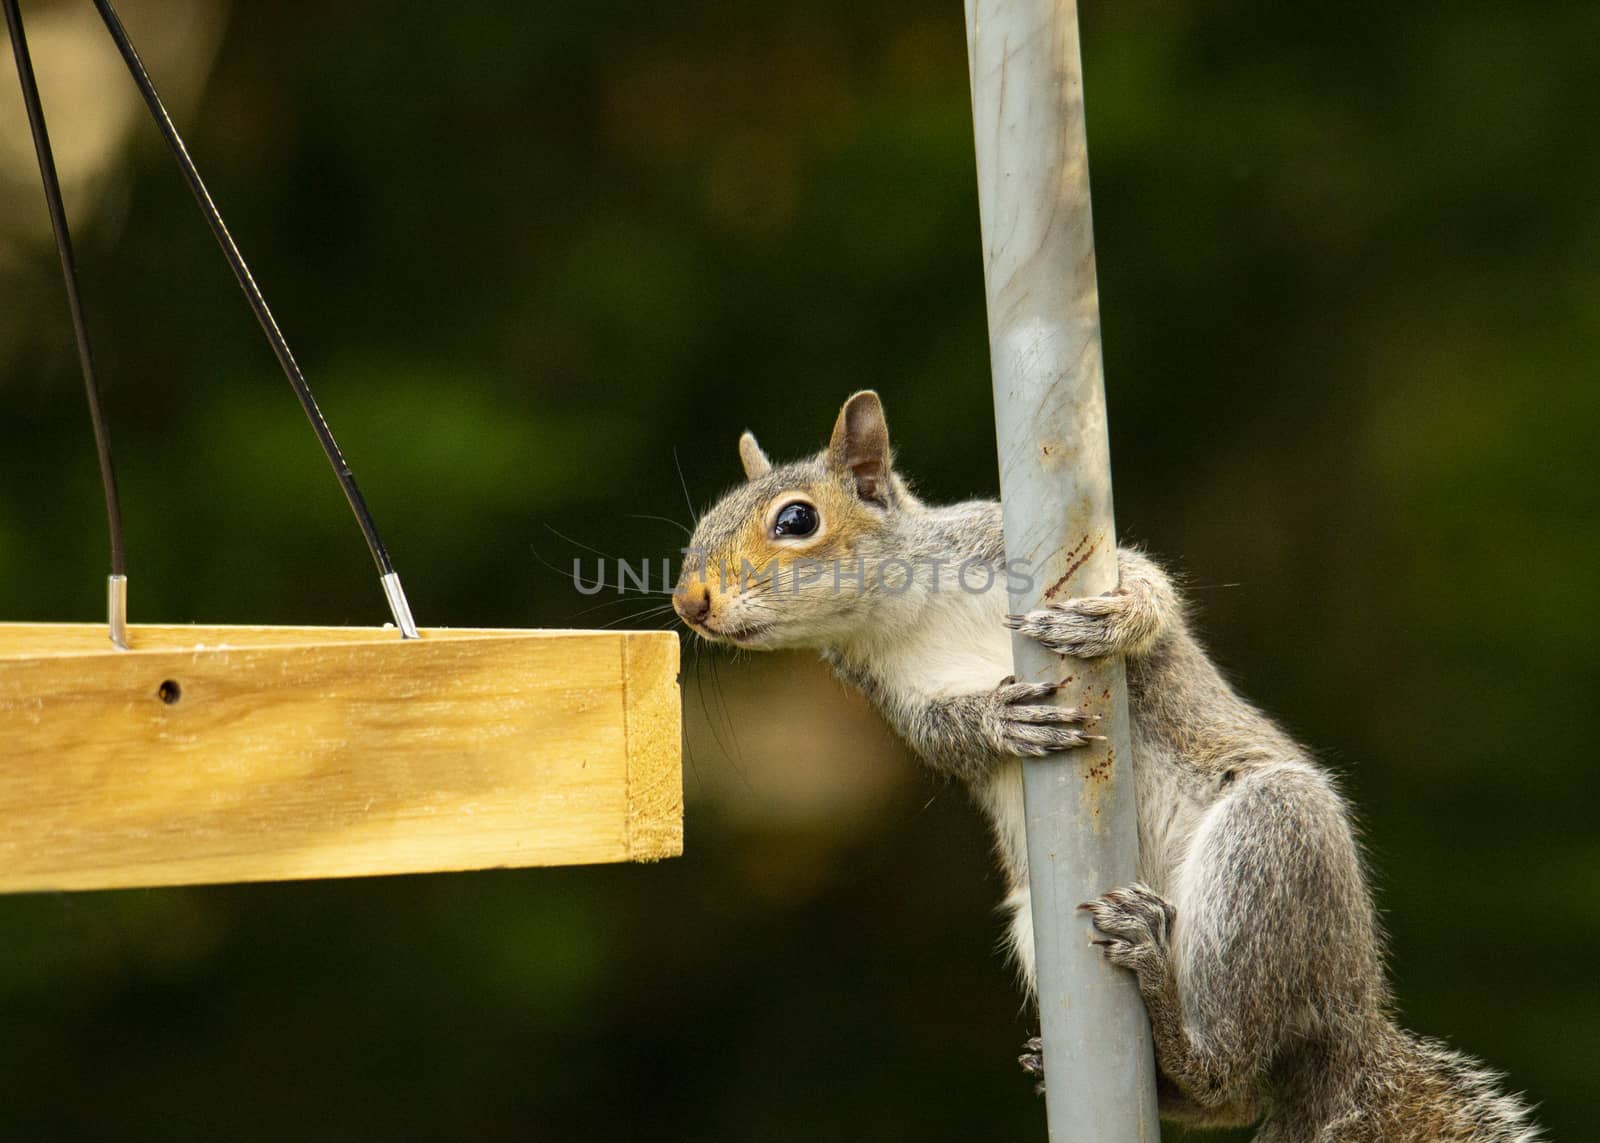 Squirrel eyes seeds in bird feeder while clinging to small pole.